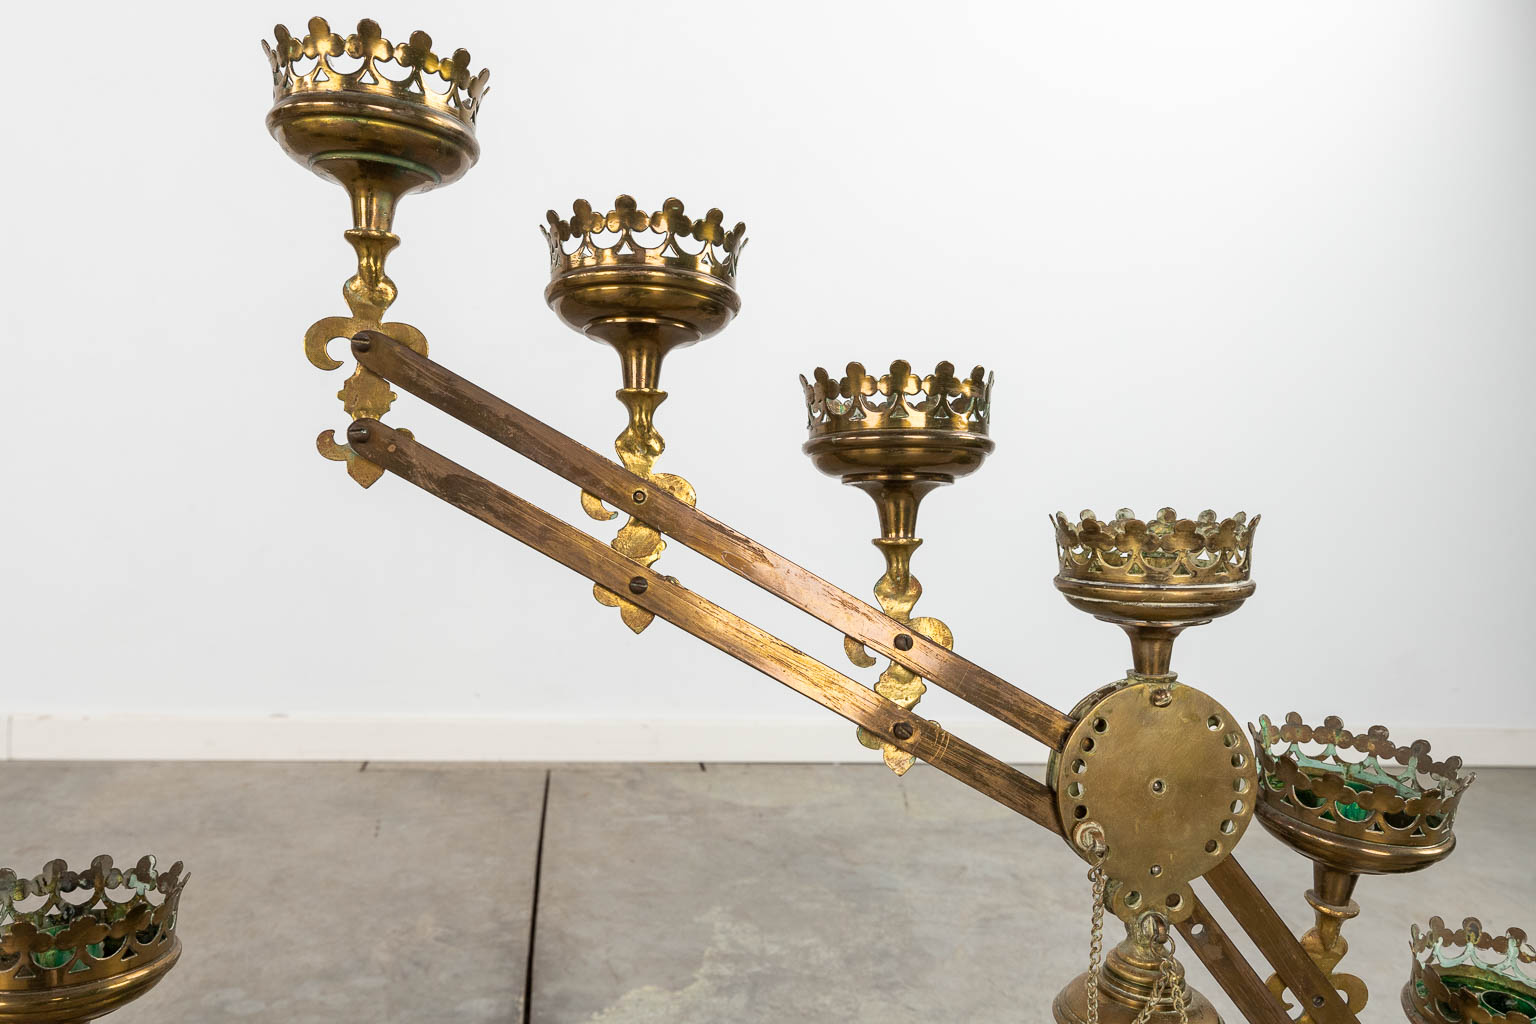 A pair of bronze candelabra with adjustable arms, and 7 candle holders. Decor of Fleur De Lis. (W:76 x H:52 cm)